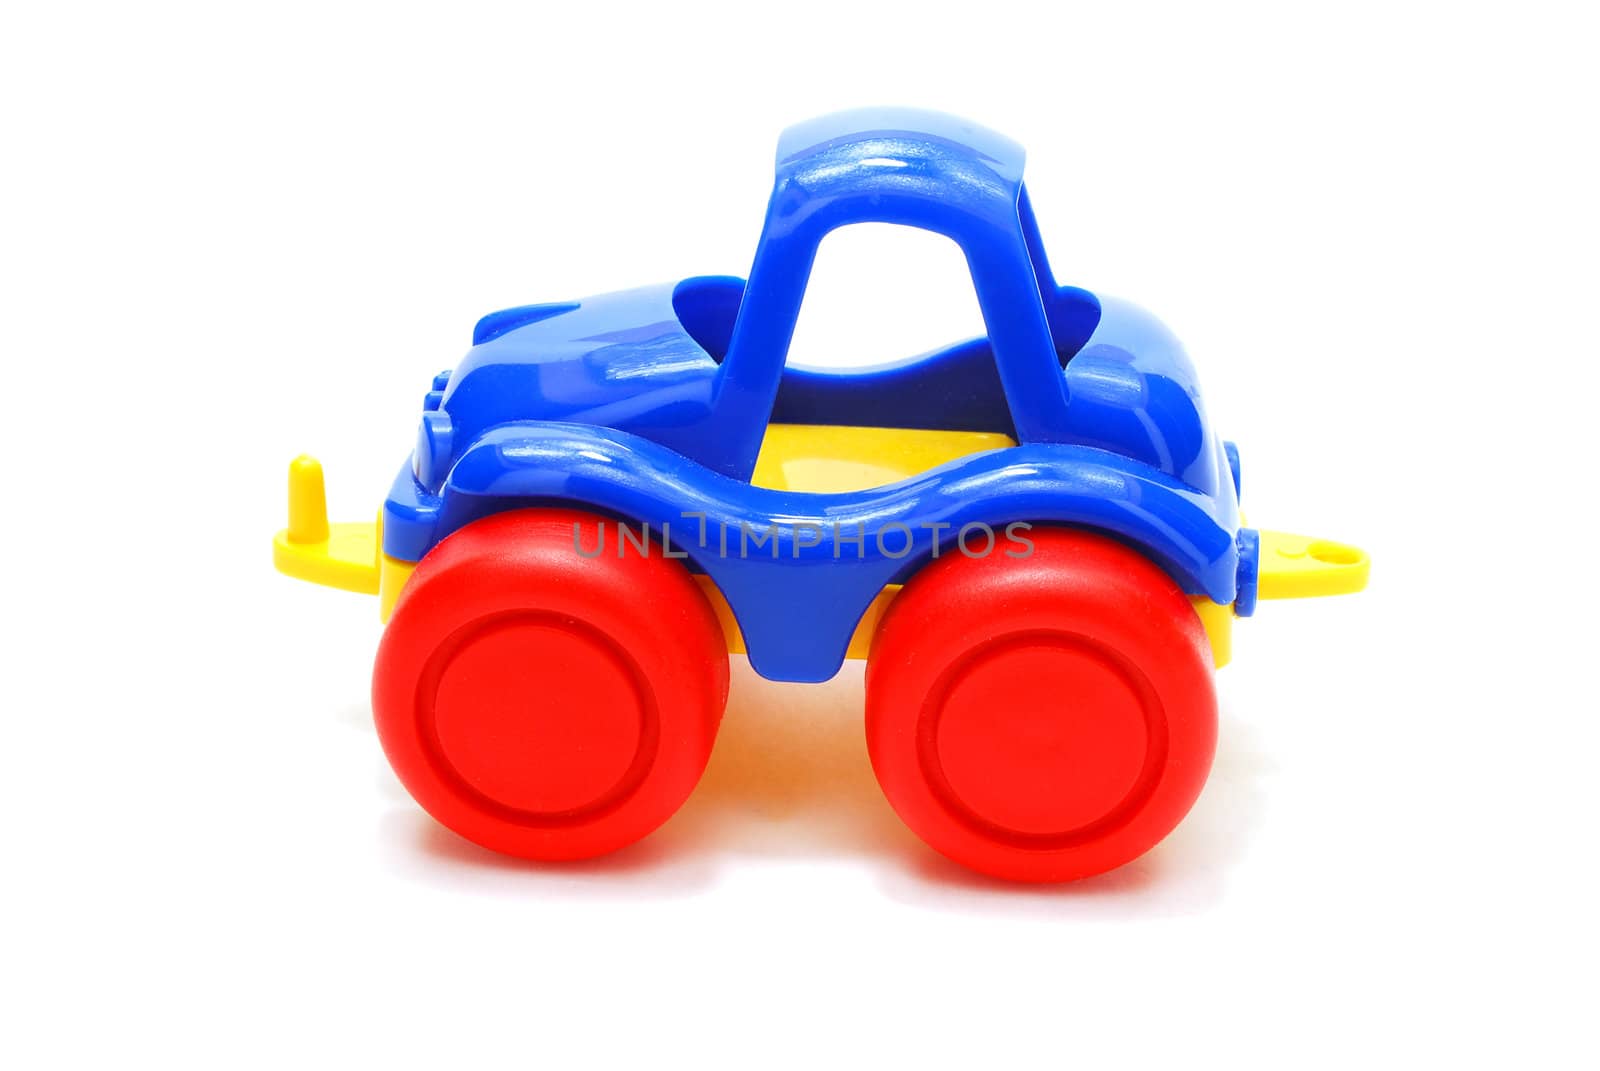 Tiny Blue Car Toy with Red Wheels Isolated on White